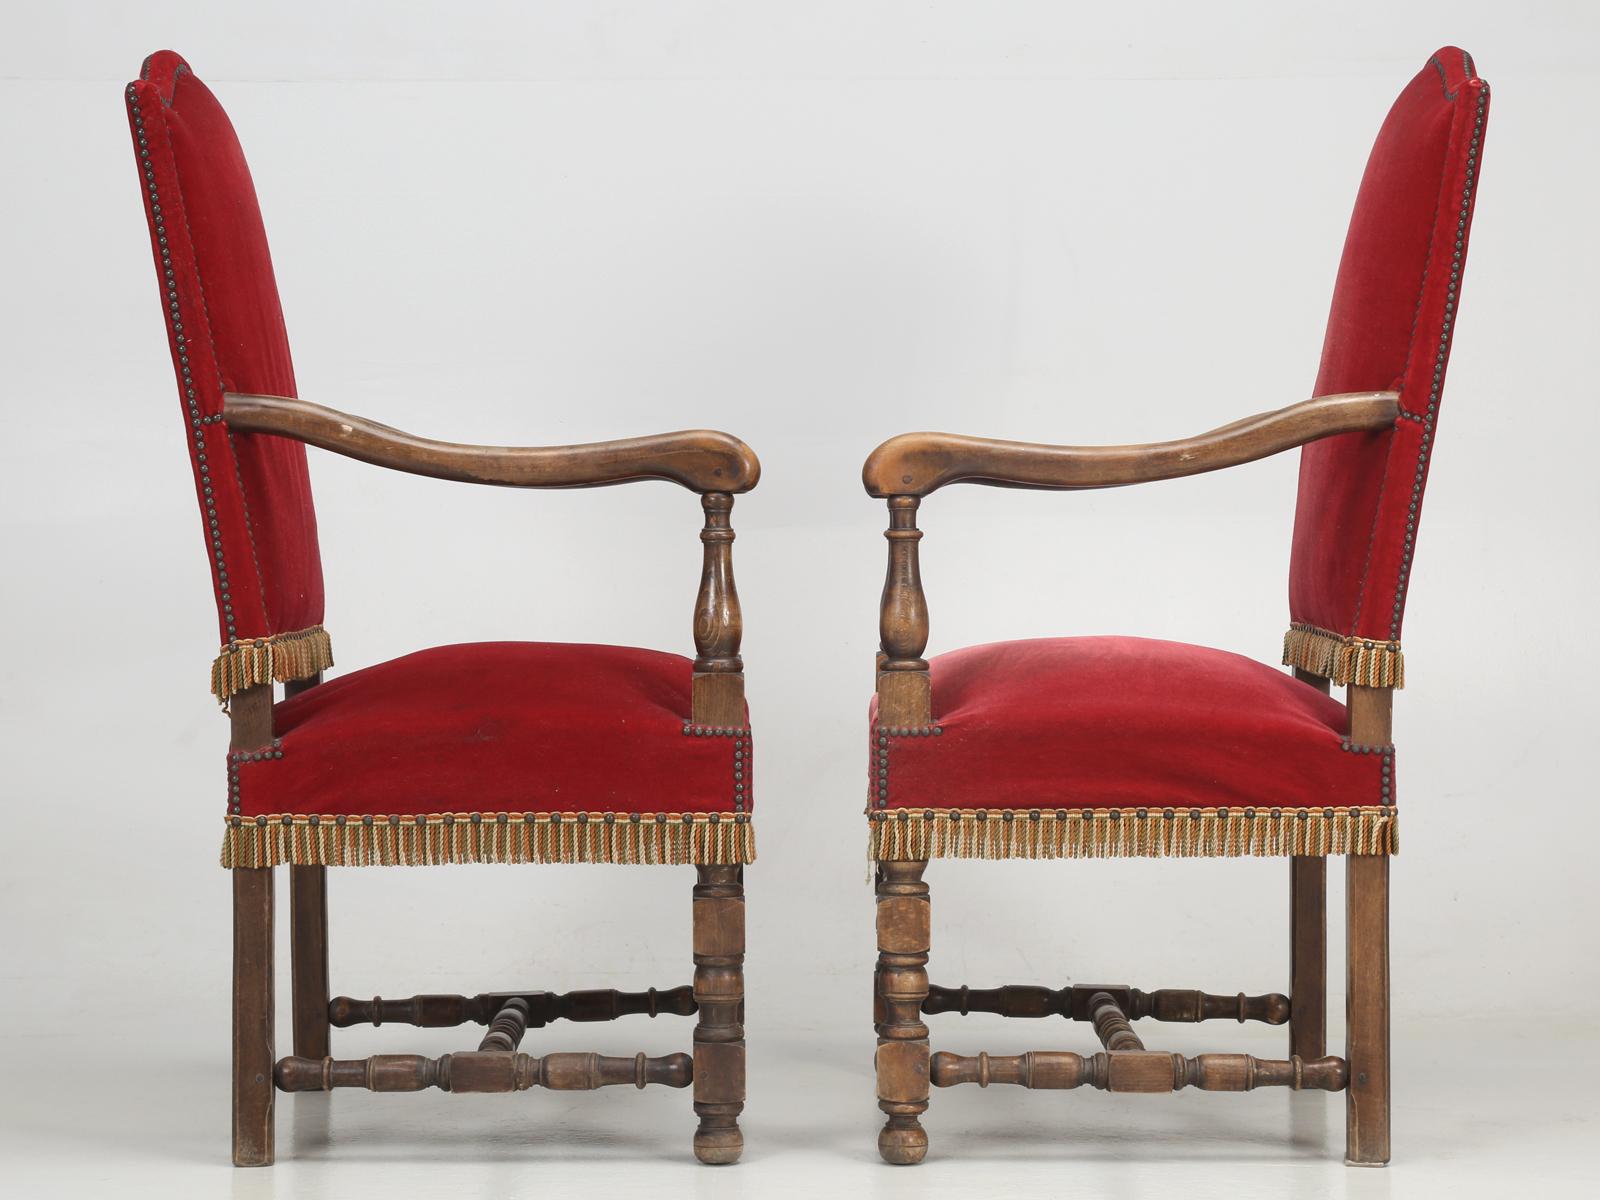 Antique Pair of French Arm or Throne Chairs, circa 1880 For Sale 4